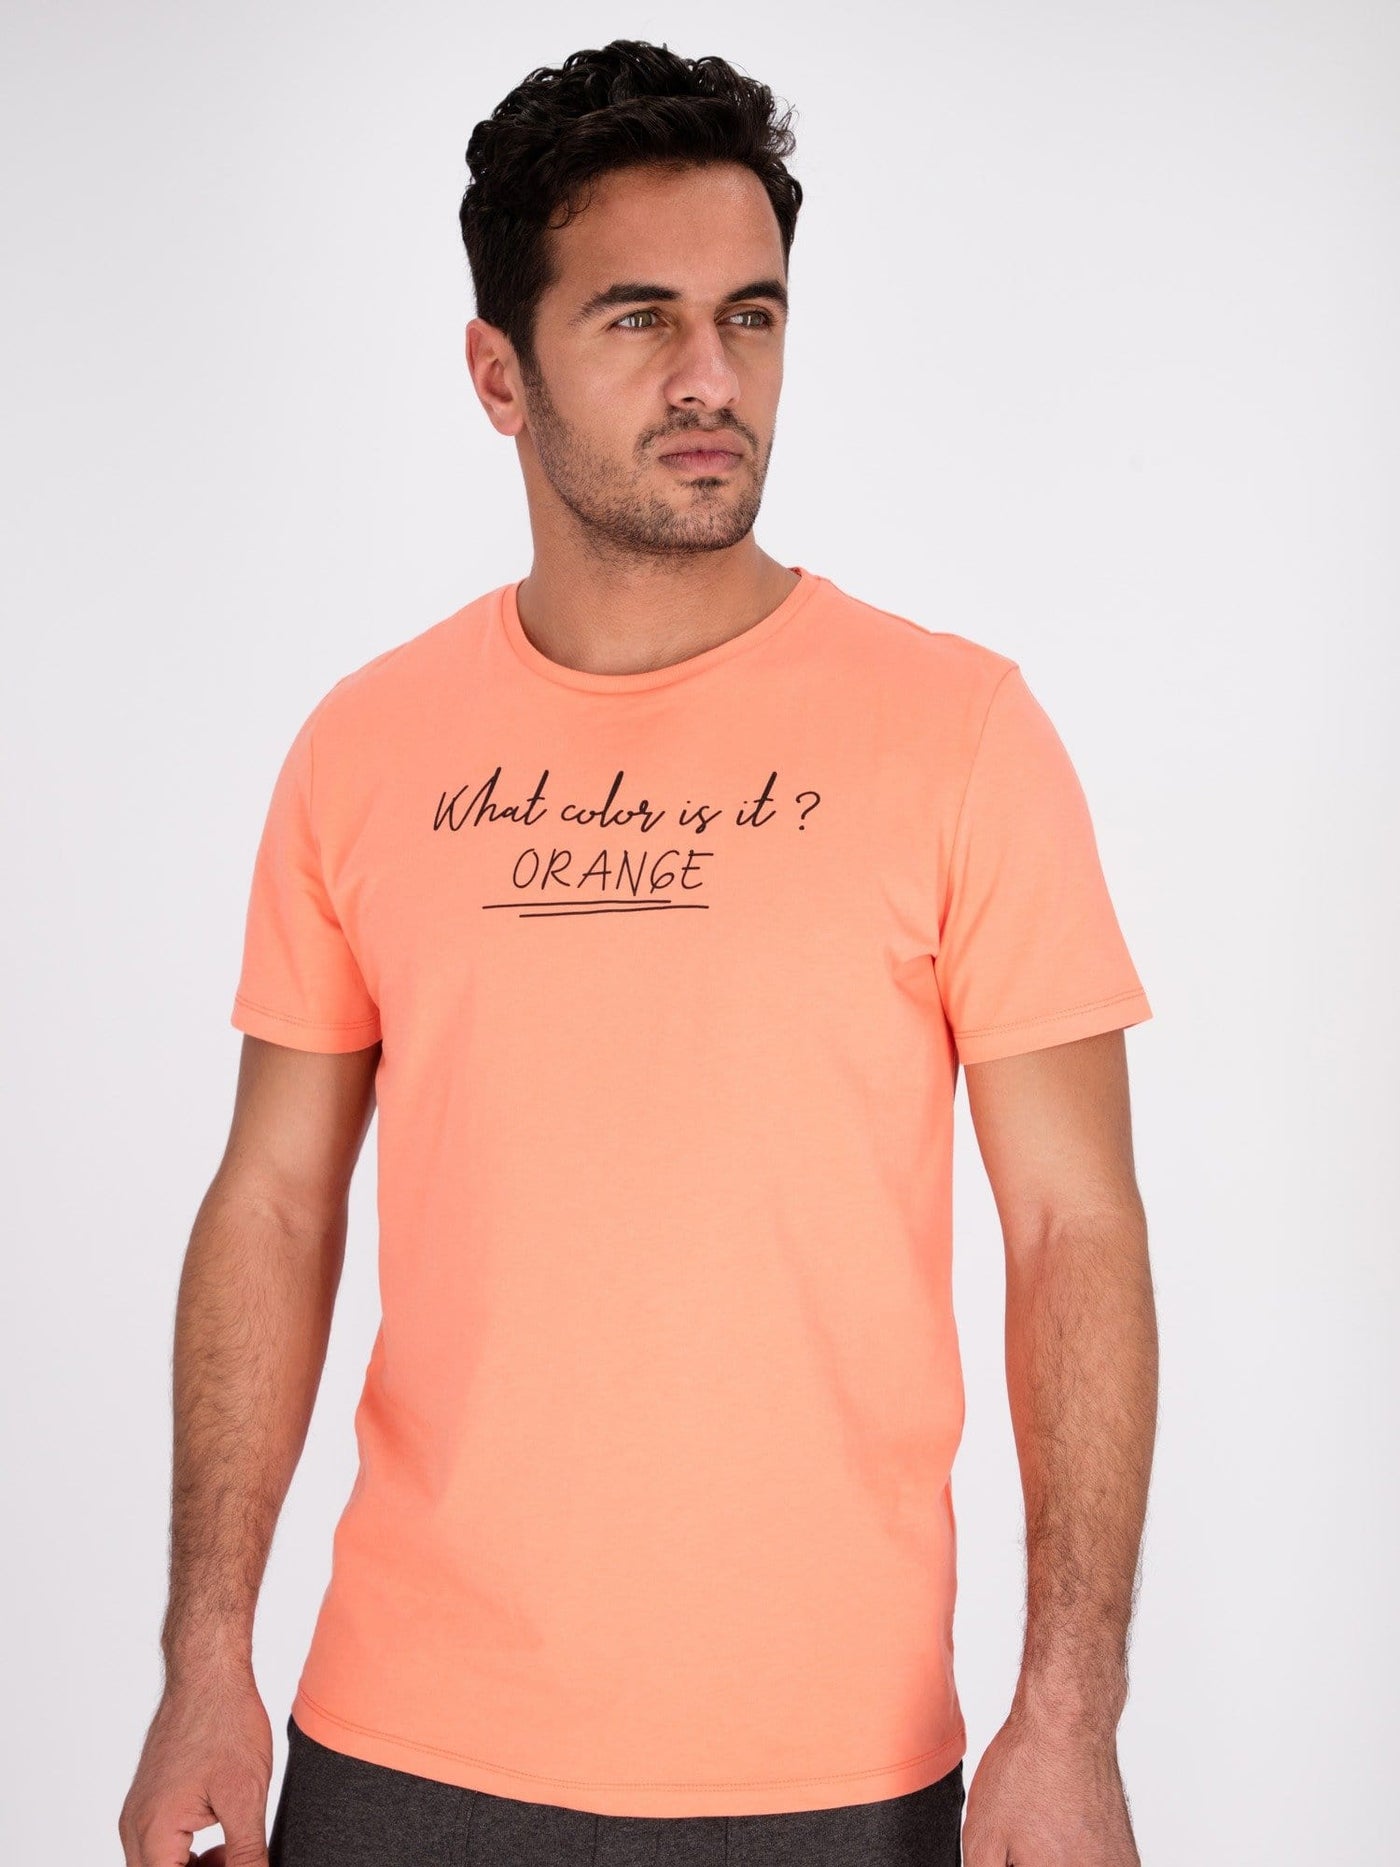 OR T-Shirts What Color Is It? Front Print T-Shirt